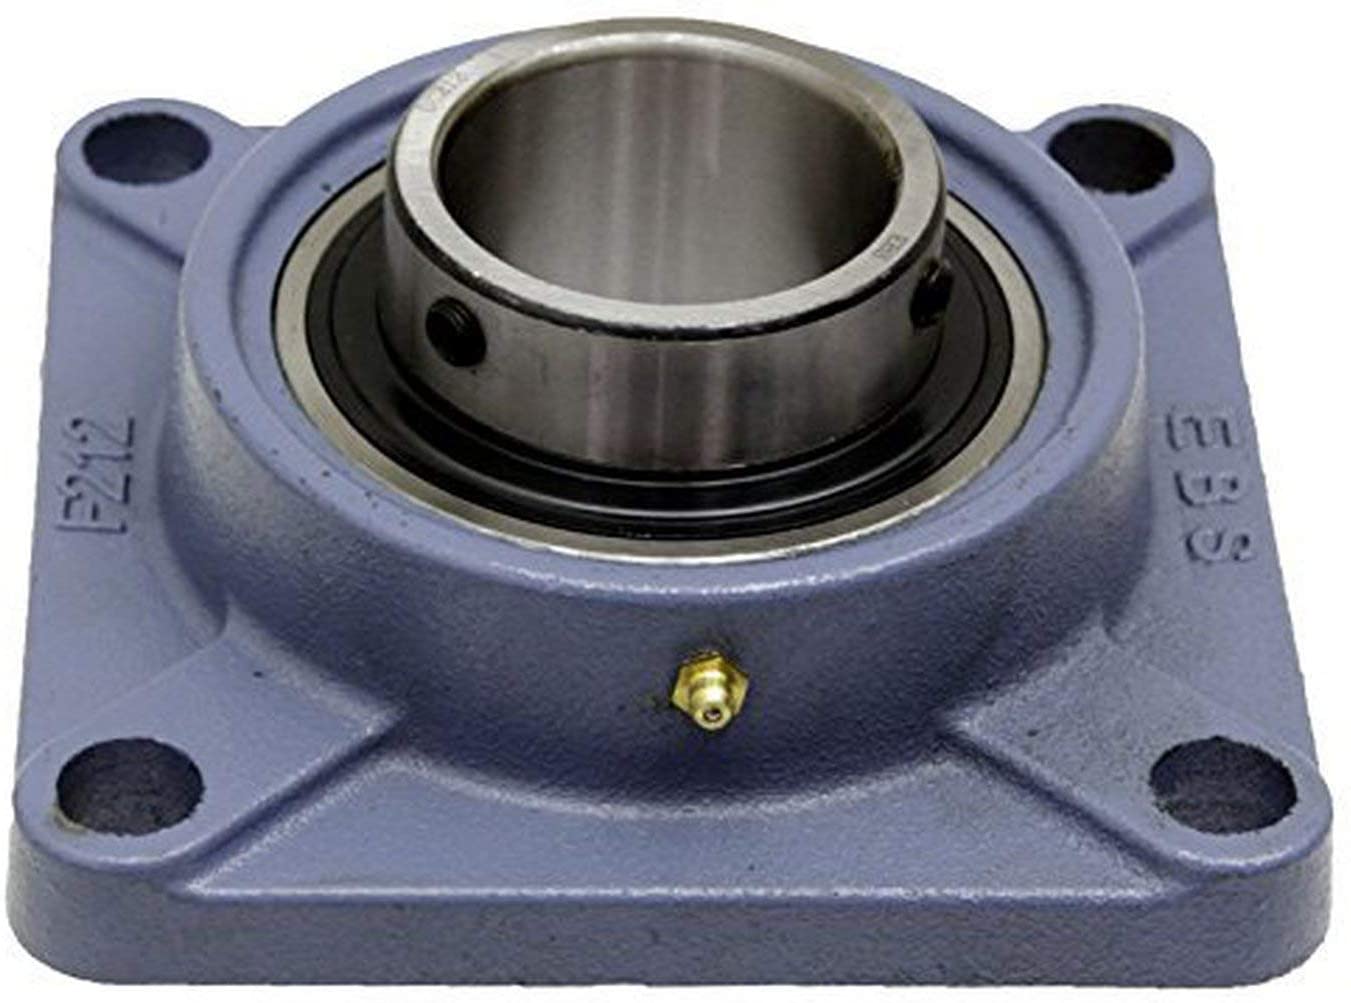 UCF209-26  PREMIUM Normal duty 4 bolt cast iron flange self-lube housed unit - Imperial Thumbnail